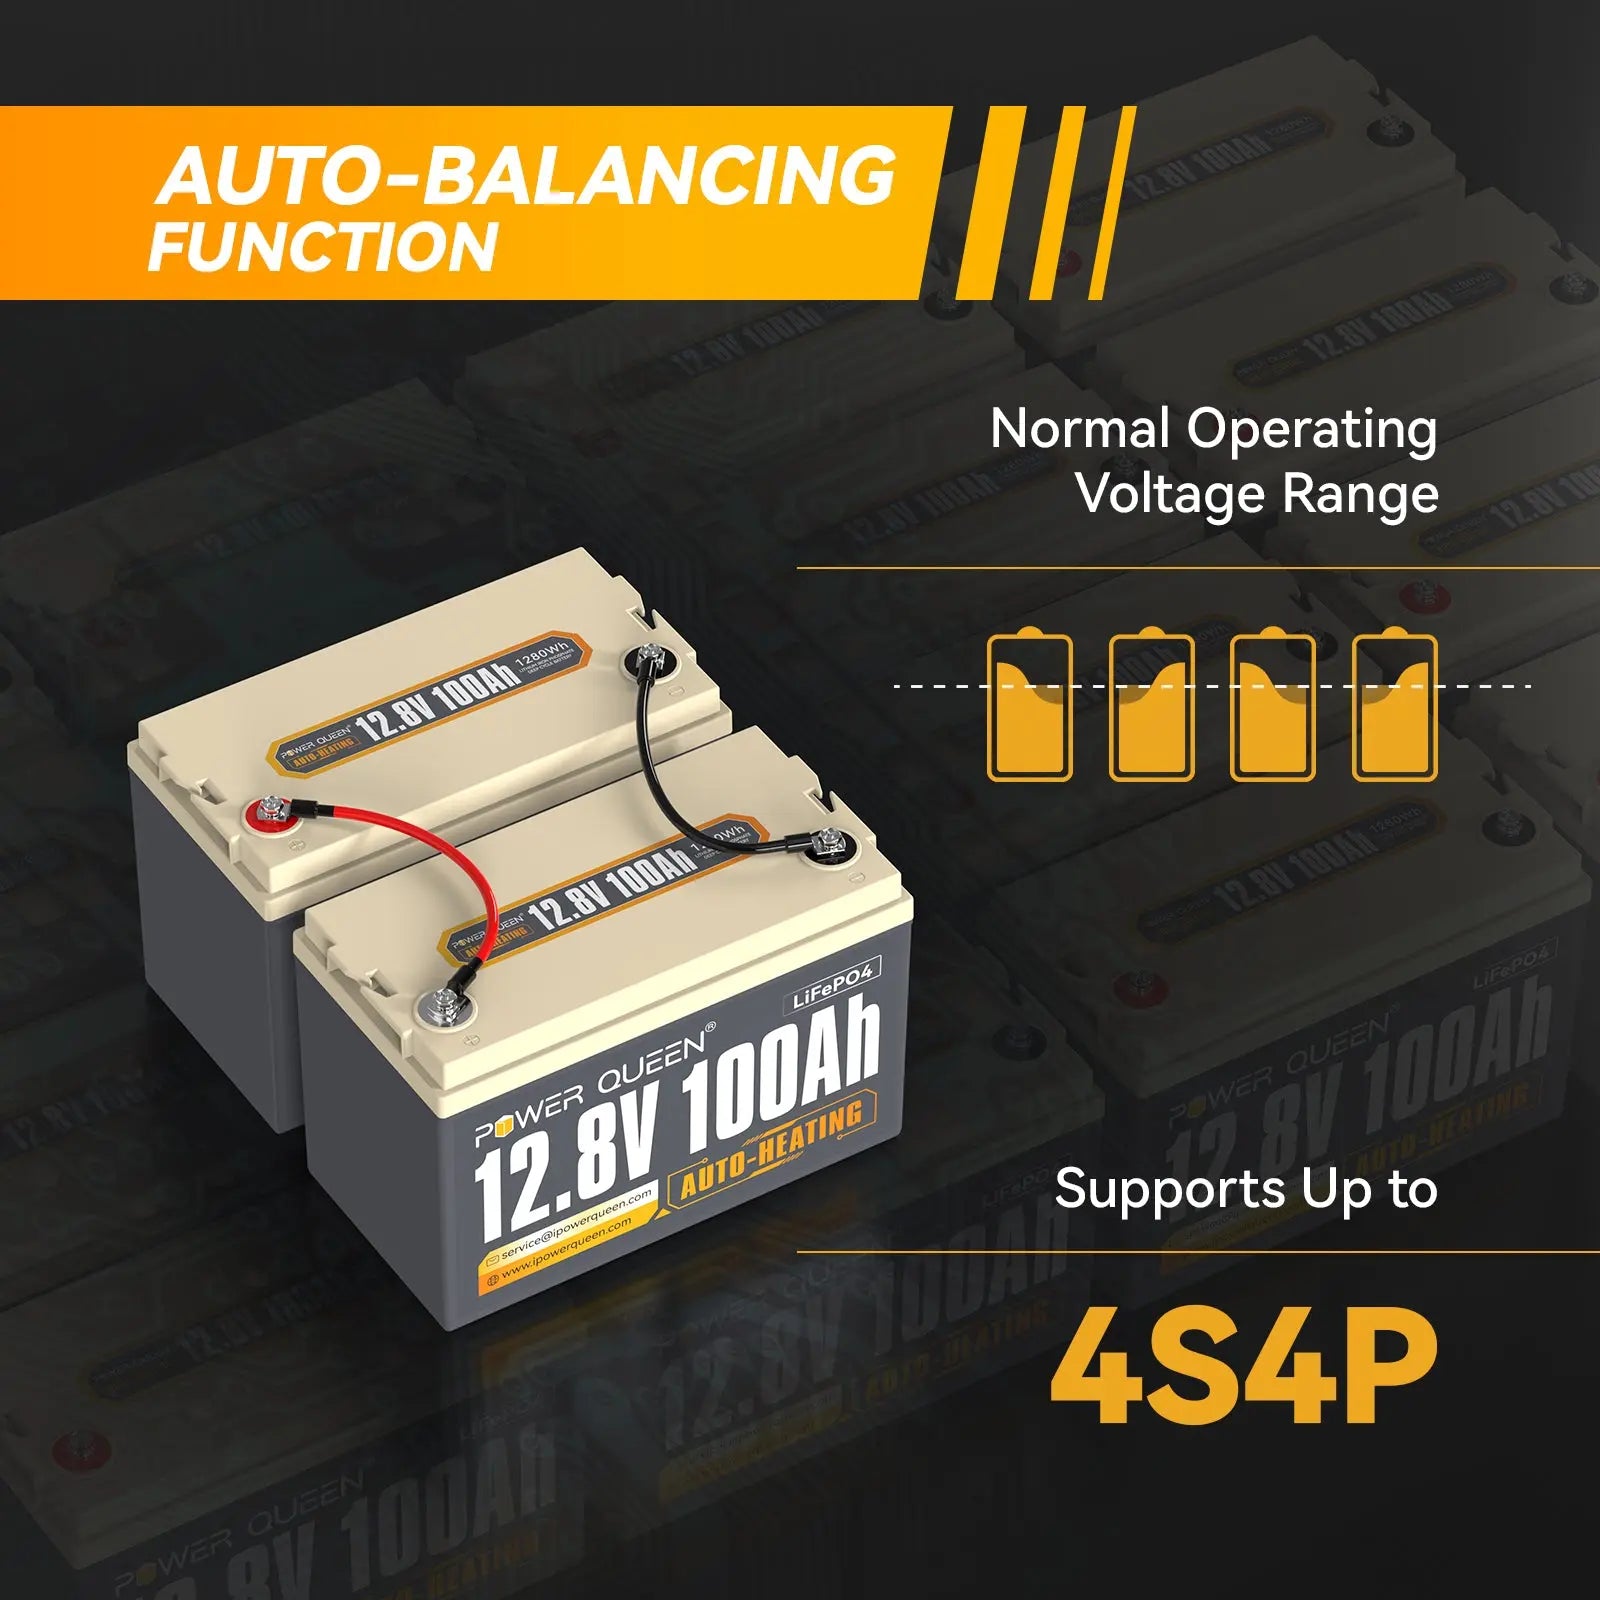 12V 100Ah Self-Heating Deep Cycle Lithium Battery supports up to 4S4P